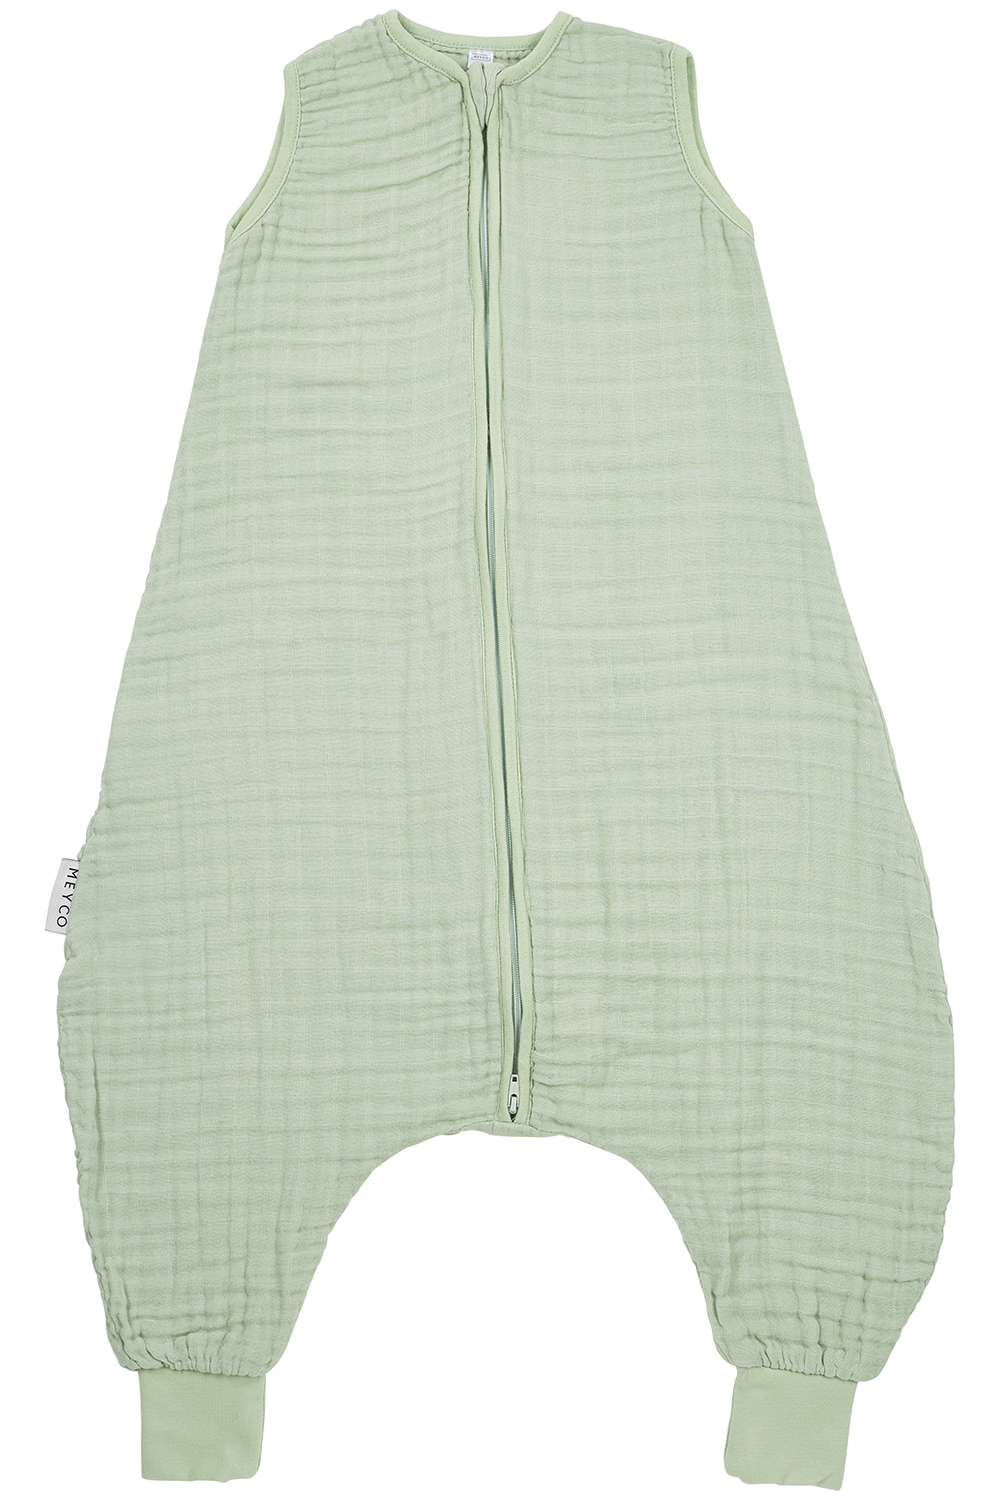 Baby sommer Schlafoverall Jumper pre-washed musselin Uni - soft green - 92cm